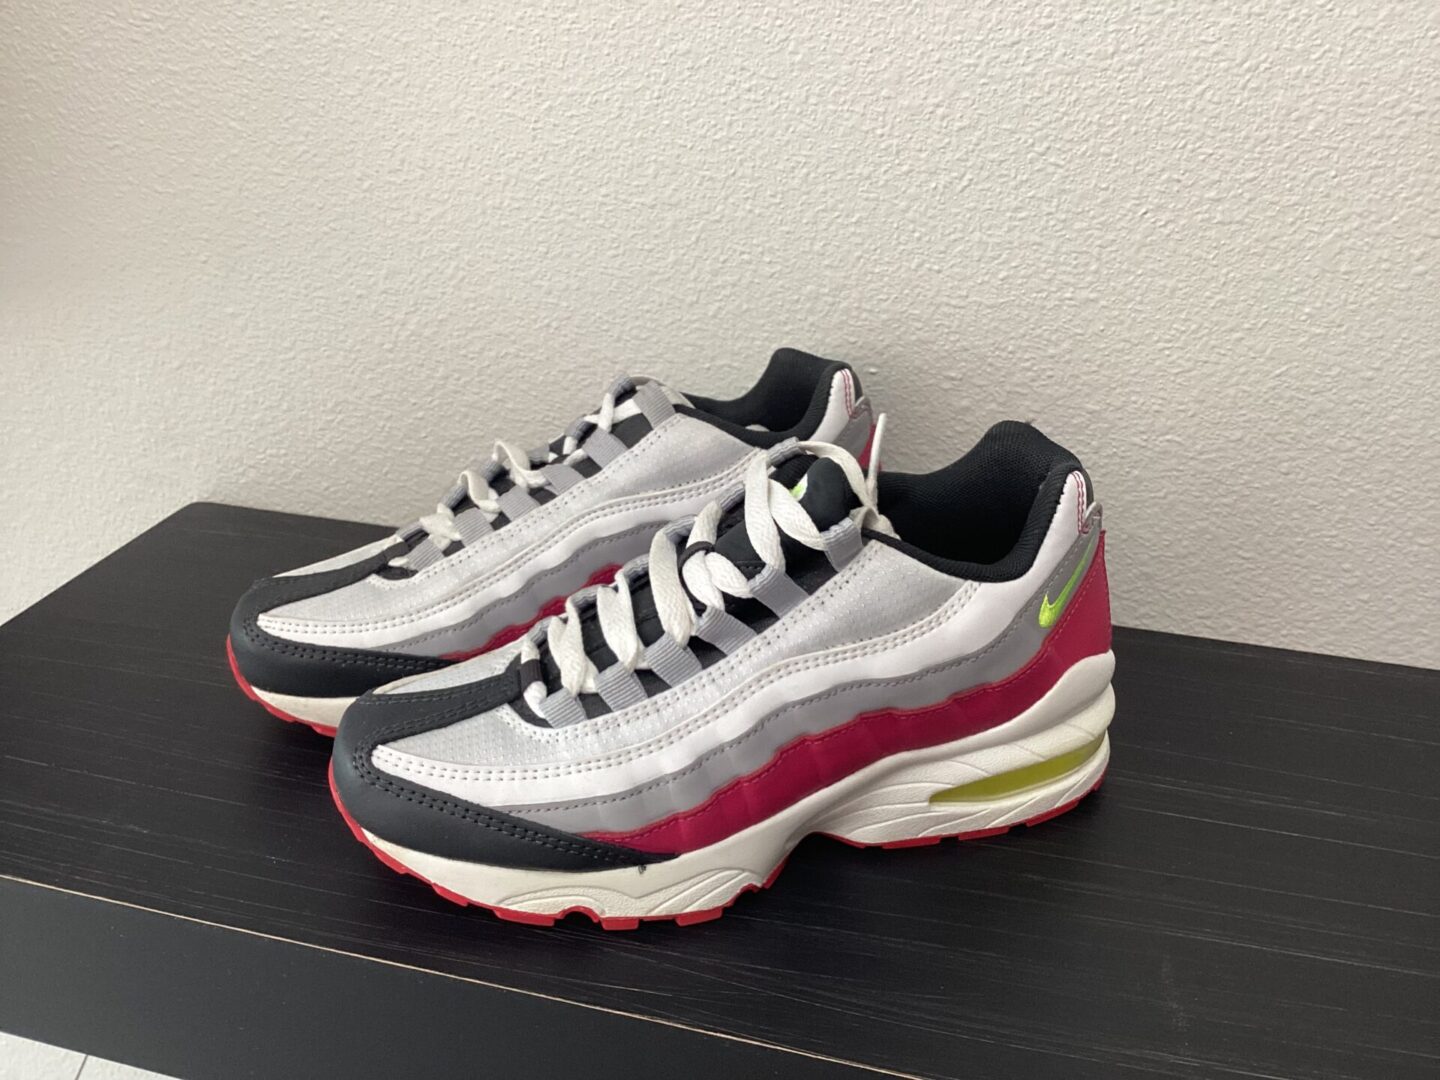 A pair of Pre-Owned NIKE-Airmax 95 with gray, white, and maroon accents on a black shelf against a white wall.